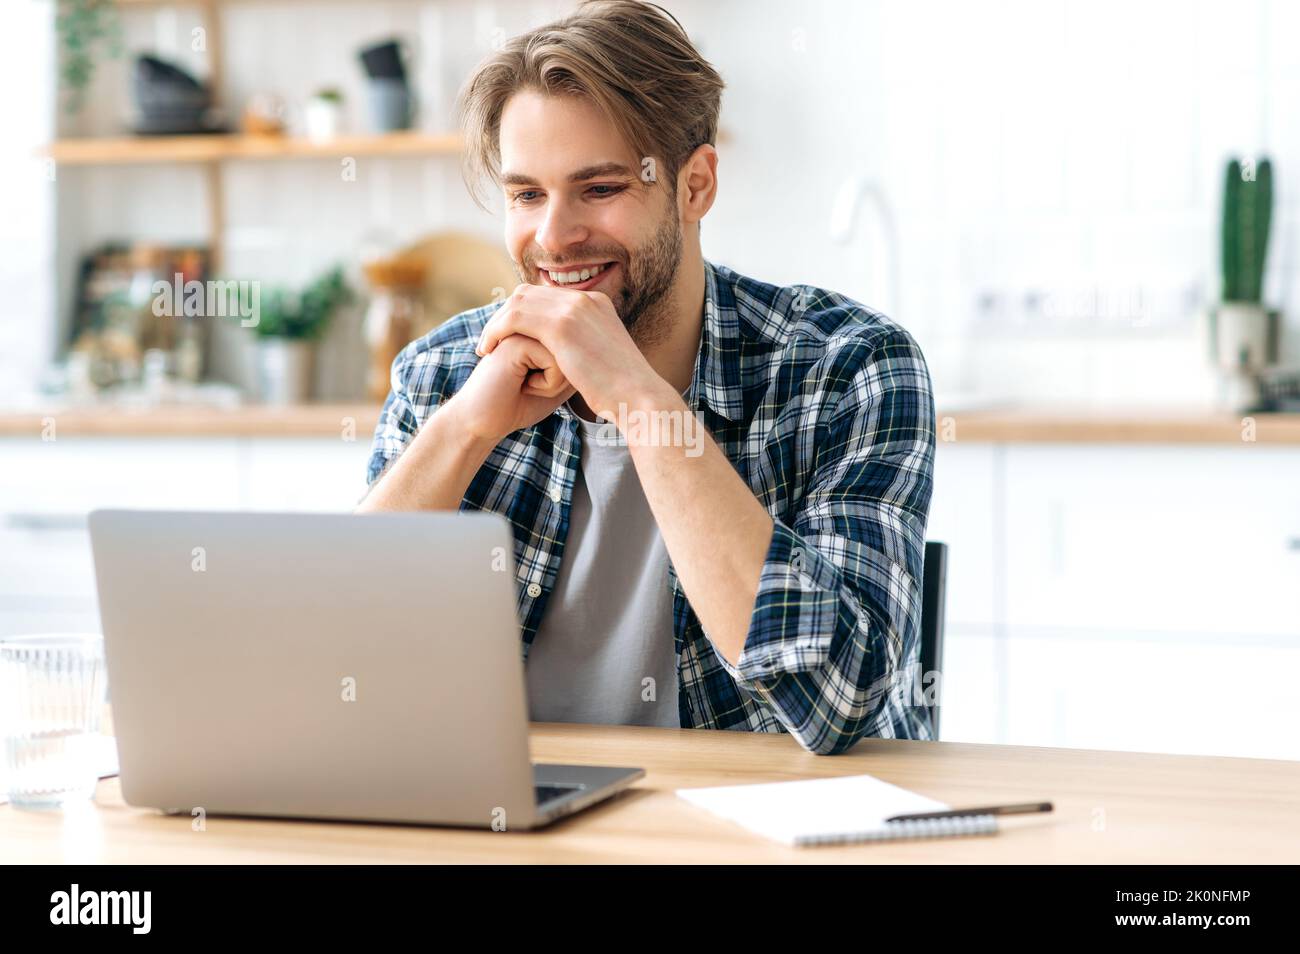 Positive successful modern caucasian male freelancer, programmer, stylishly dressed, sits at desk with laptop in a kitchen at home, working on a creative project, looking to the side, smiling happily Stock Photo